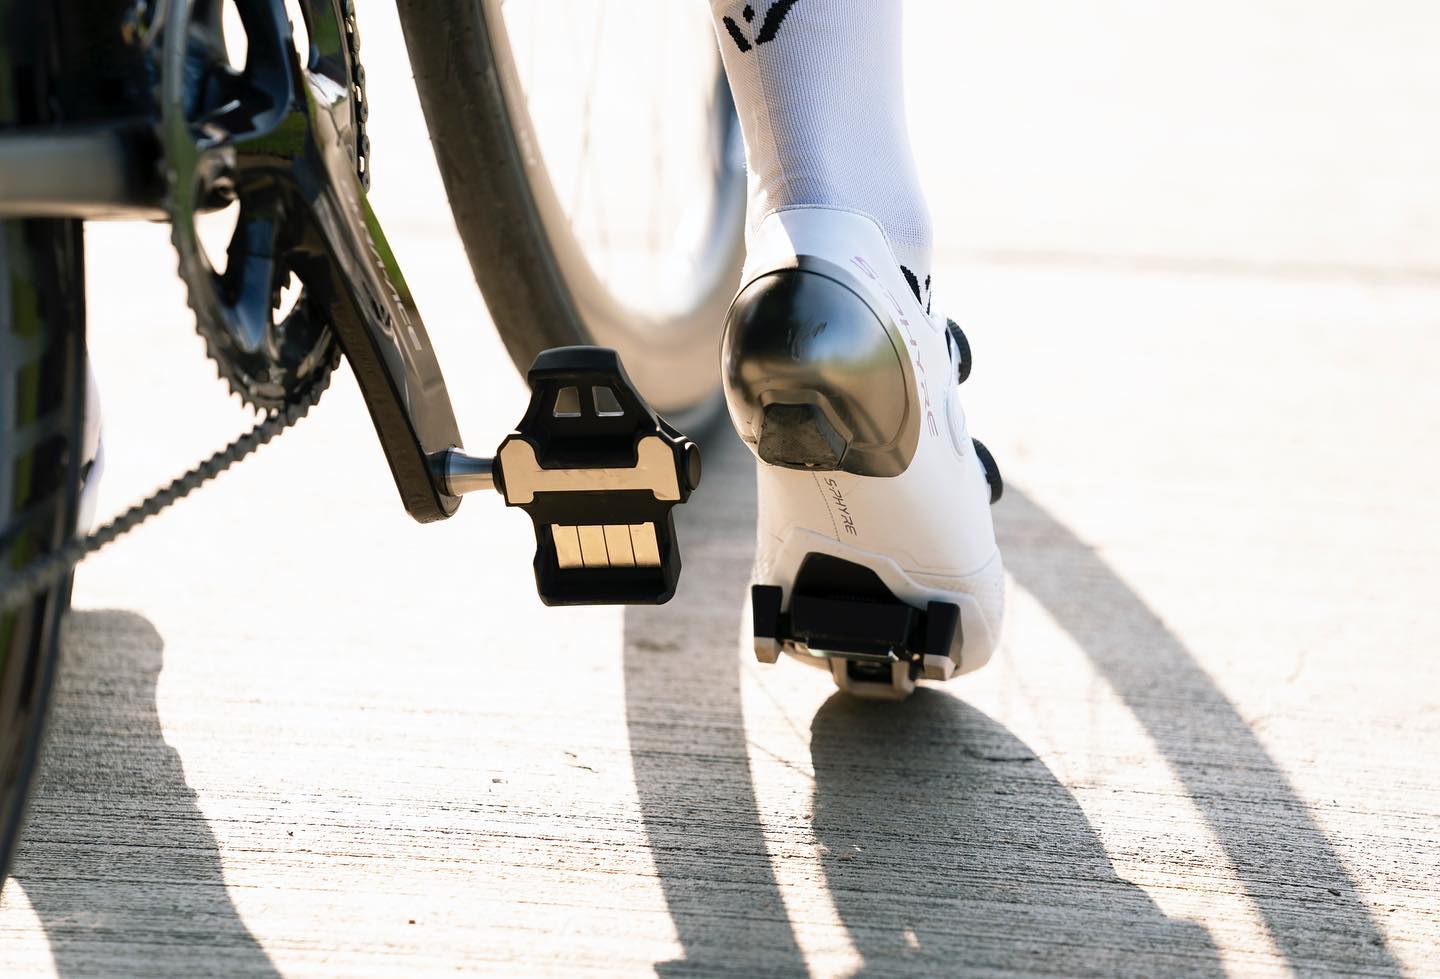 Found: Aveta introduces magnetic clipless pedals for road bikes with  magnetic flat pedal adapters - Bikerumor